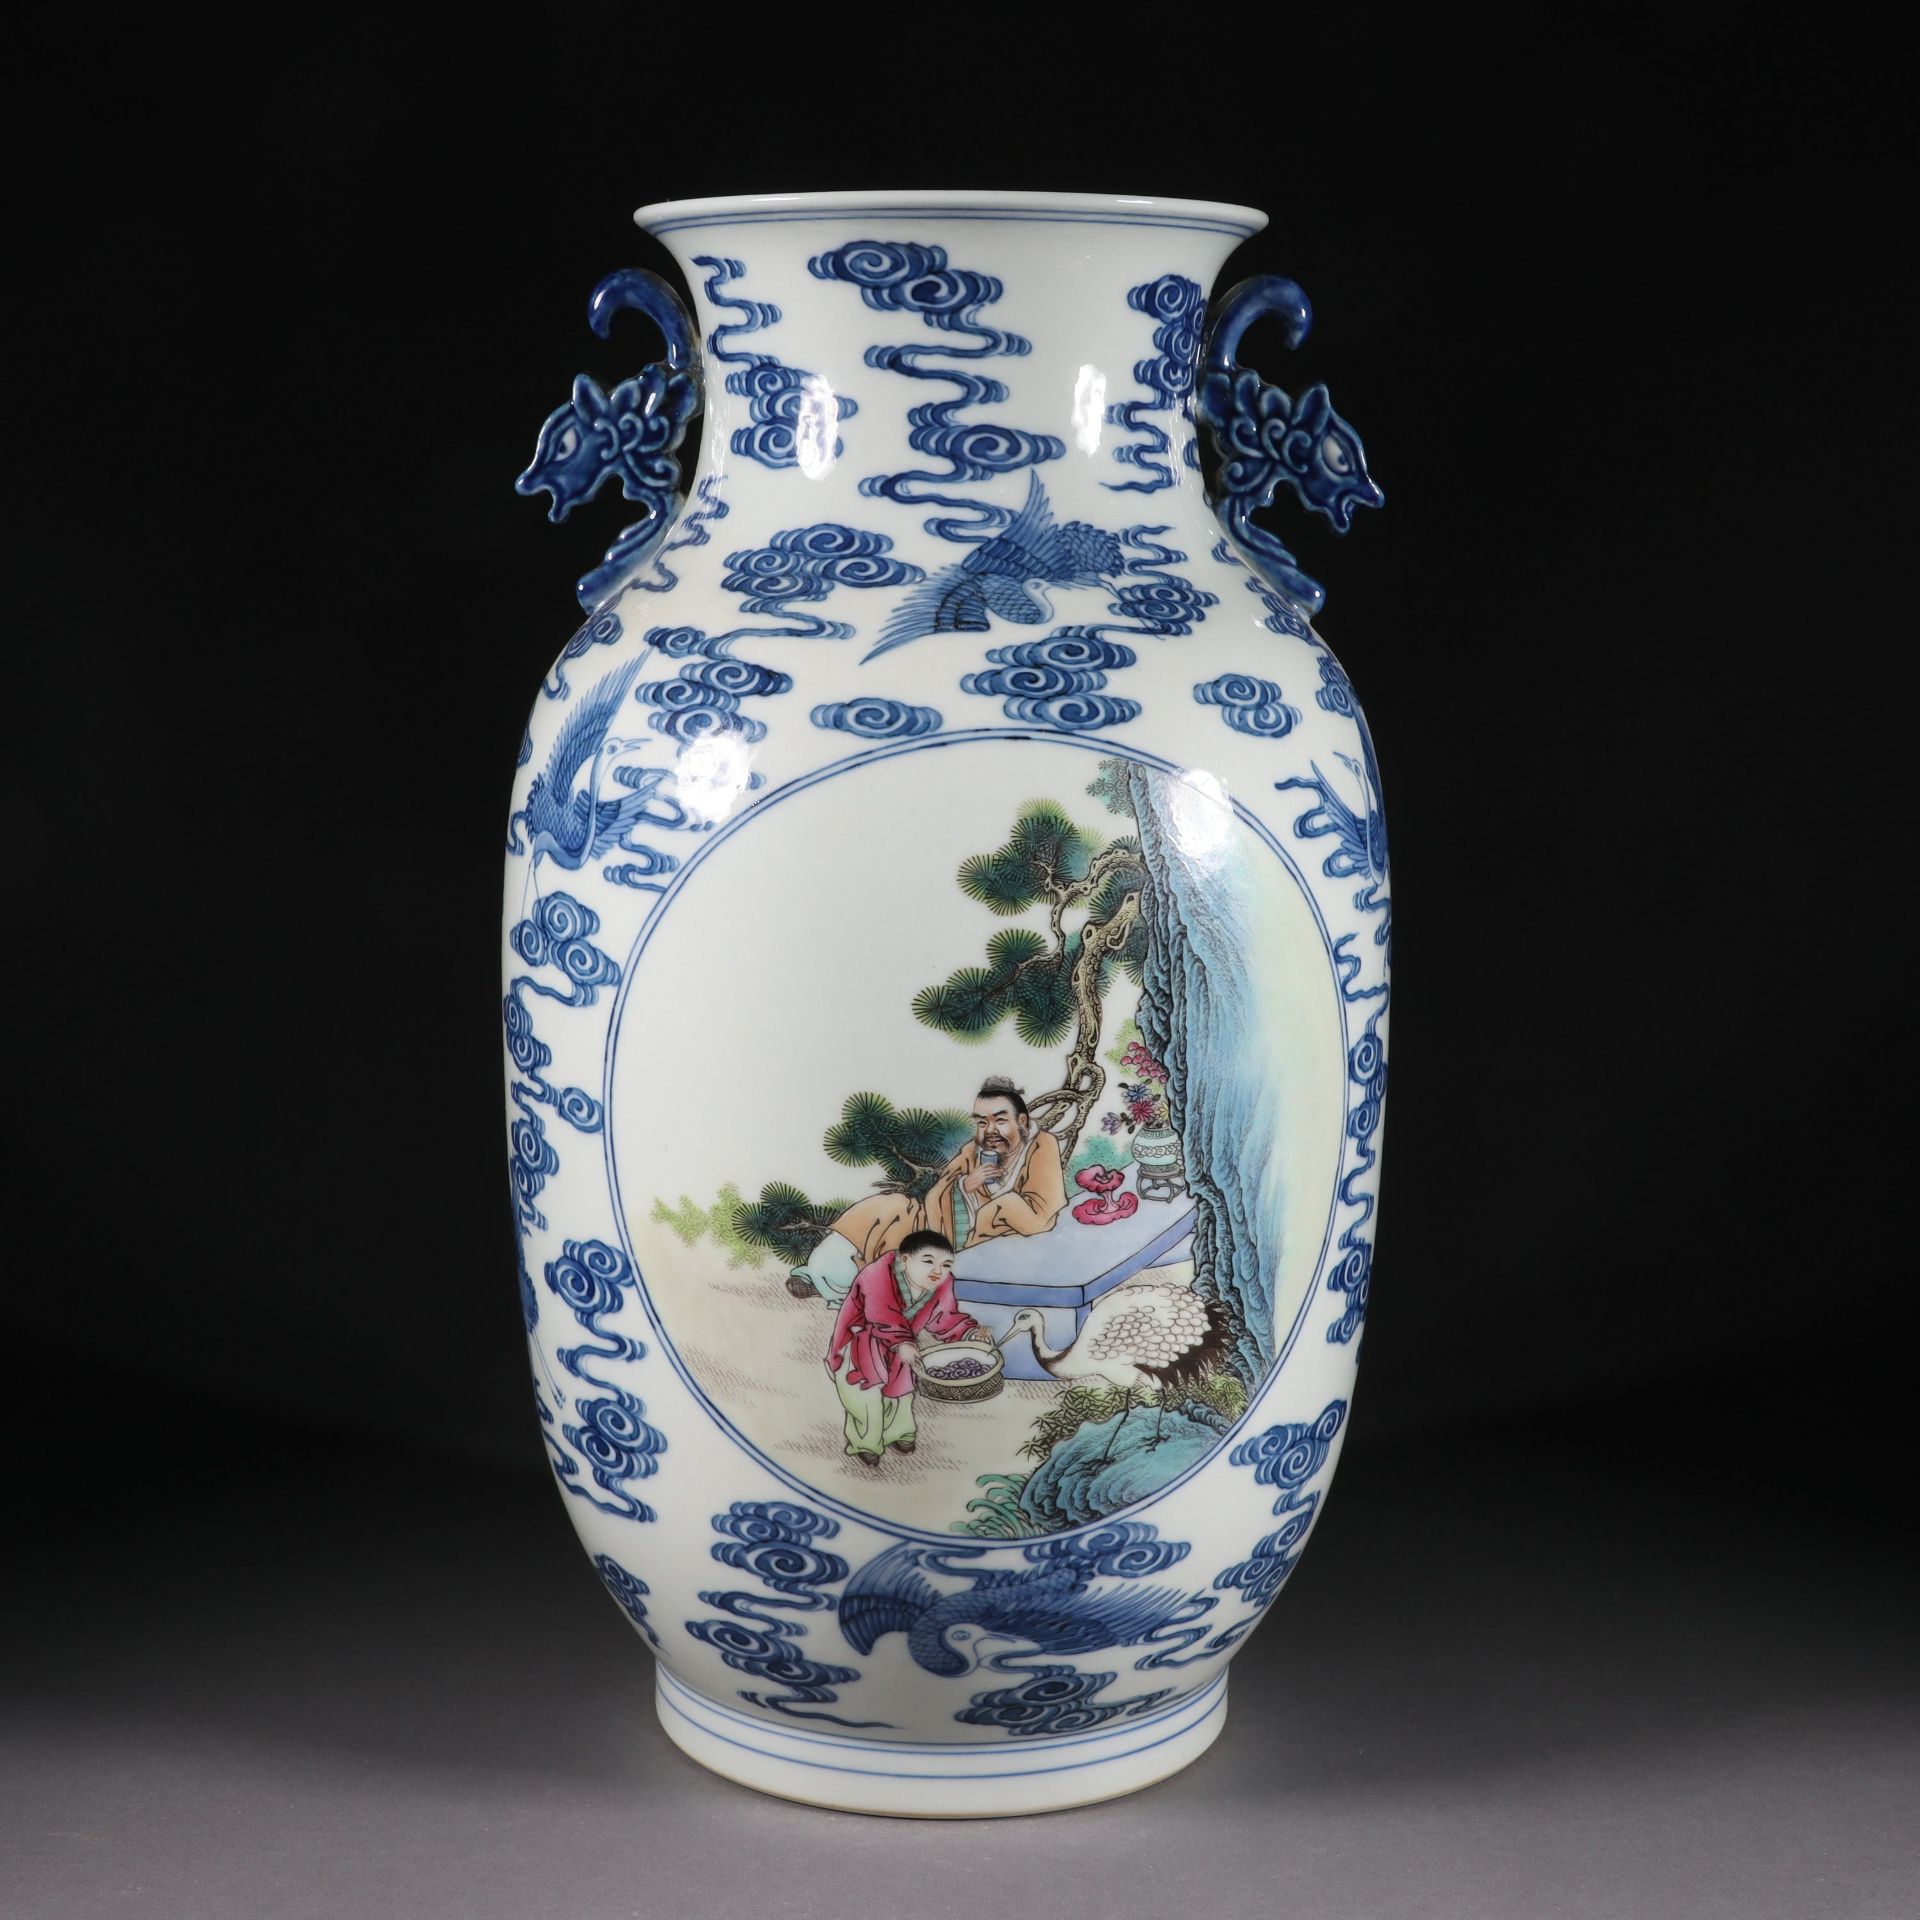 Blue and white pastel figure amphora from the Qing dynasty